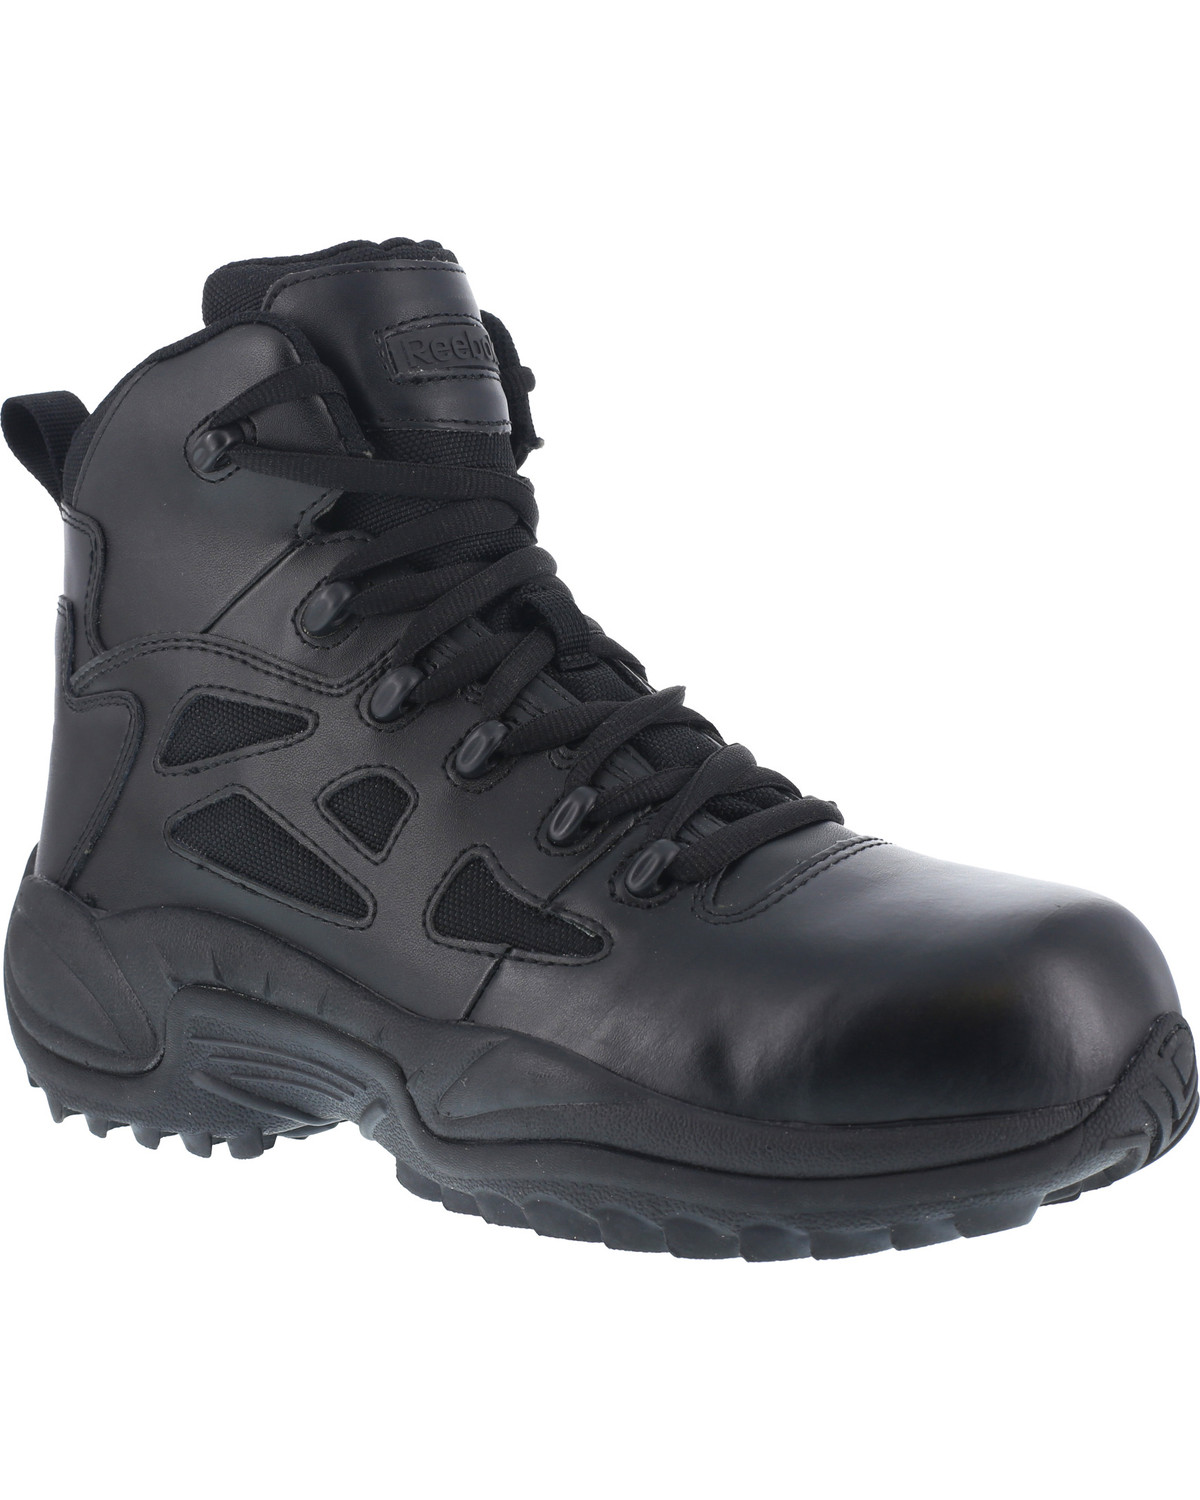 Reebok Women's Stealth 6" Lace-Up Side Zip Work Boots - Composite Toe